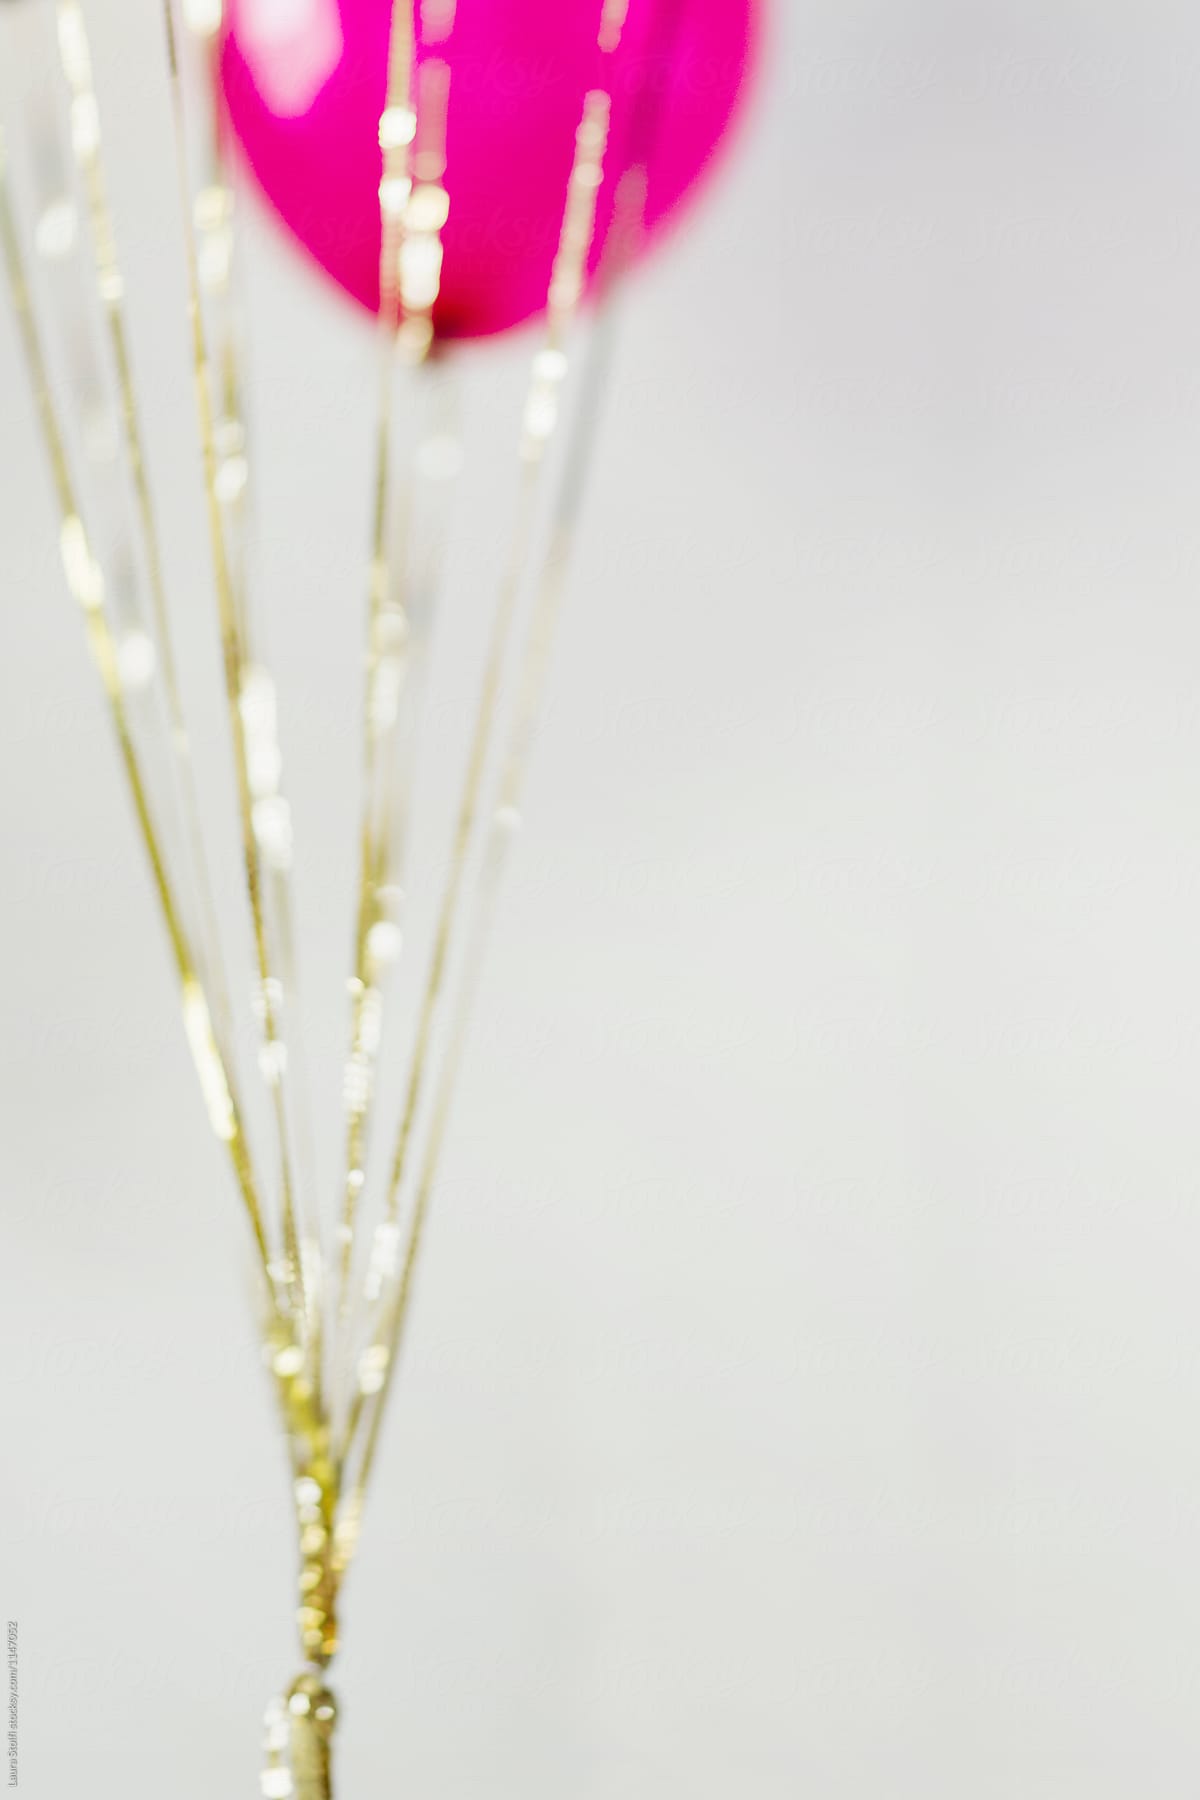 Blurry Gold Sequin Strings Hanging From Balloons by Stocksy Contributor  Laura Stolfi - Stocksy